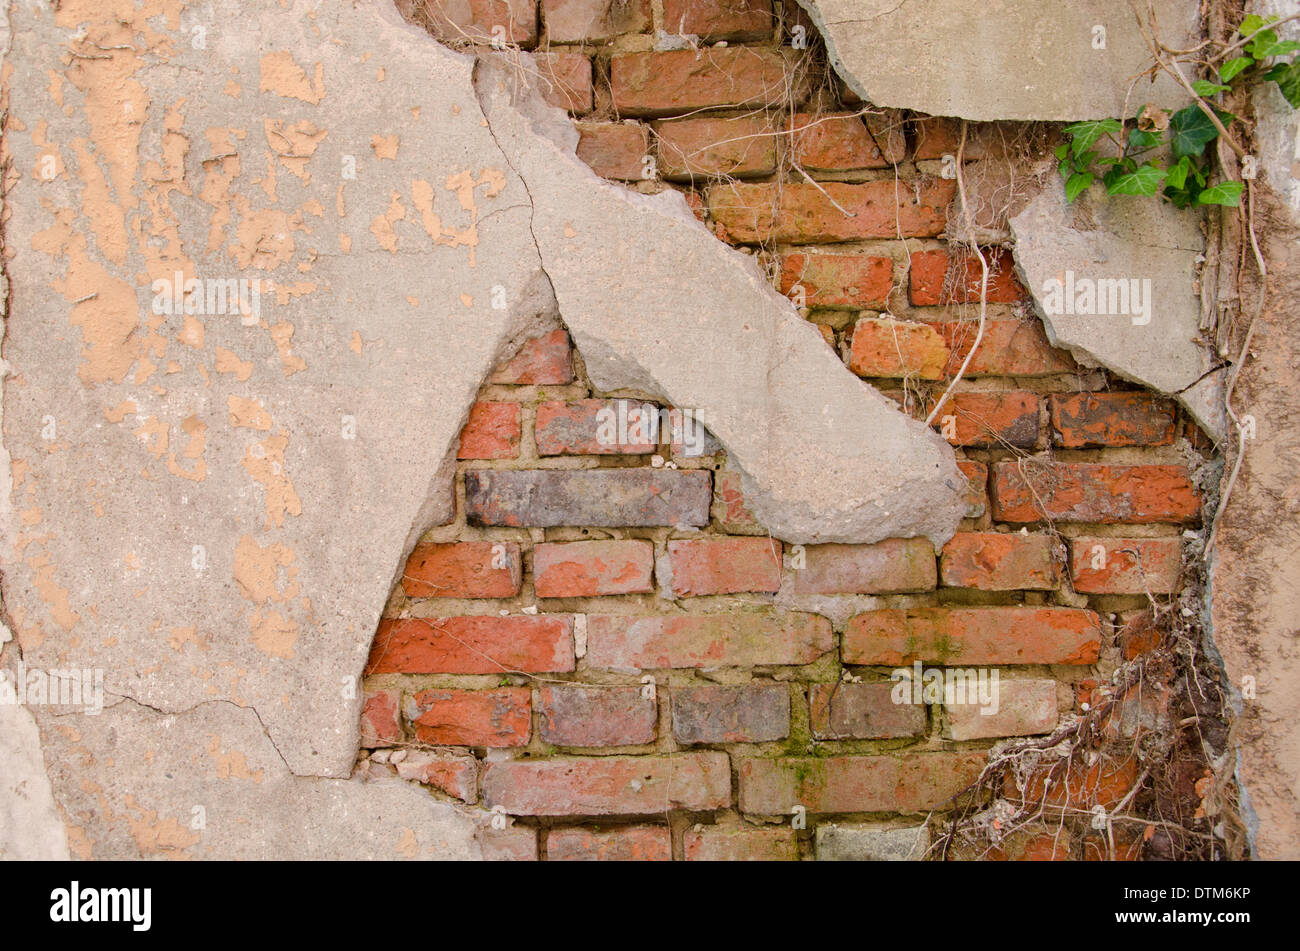 A crack in the wall. Stock Photo